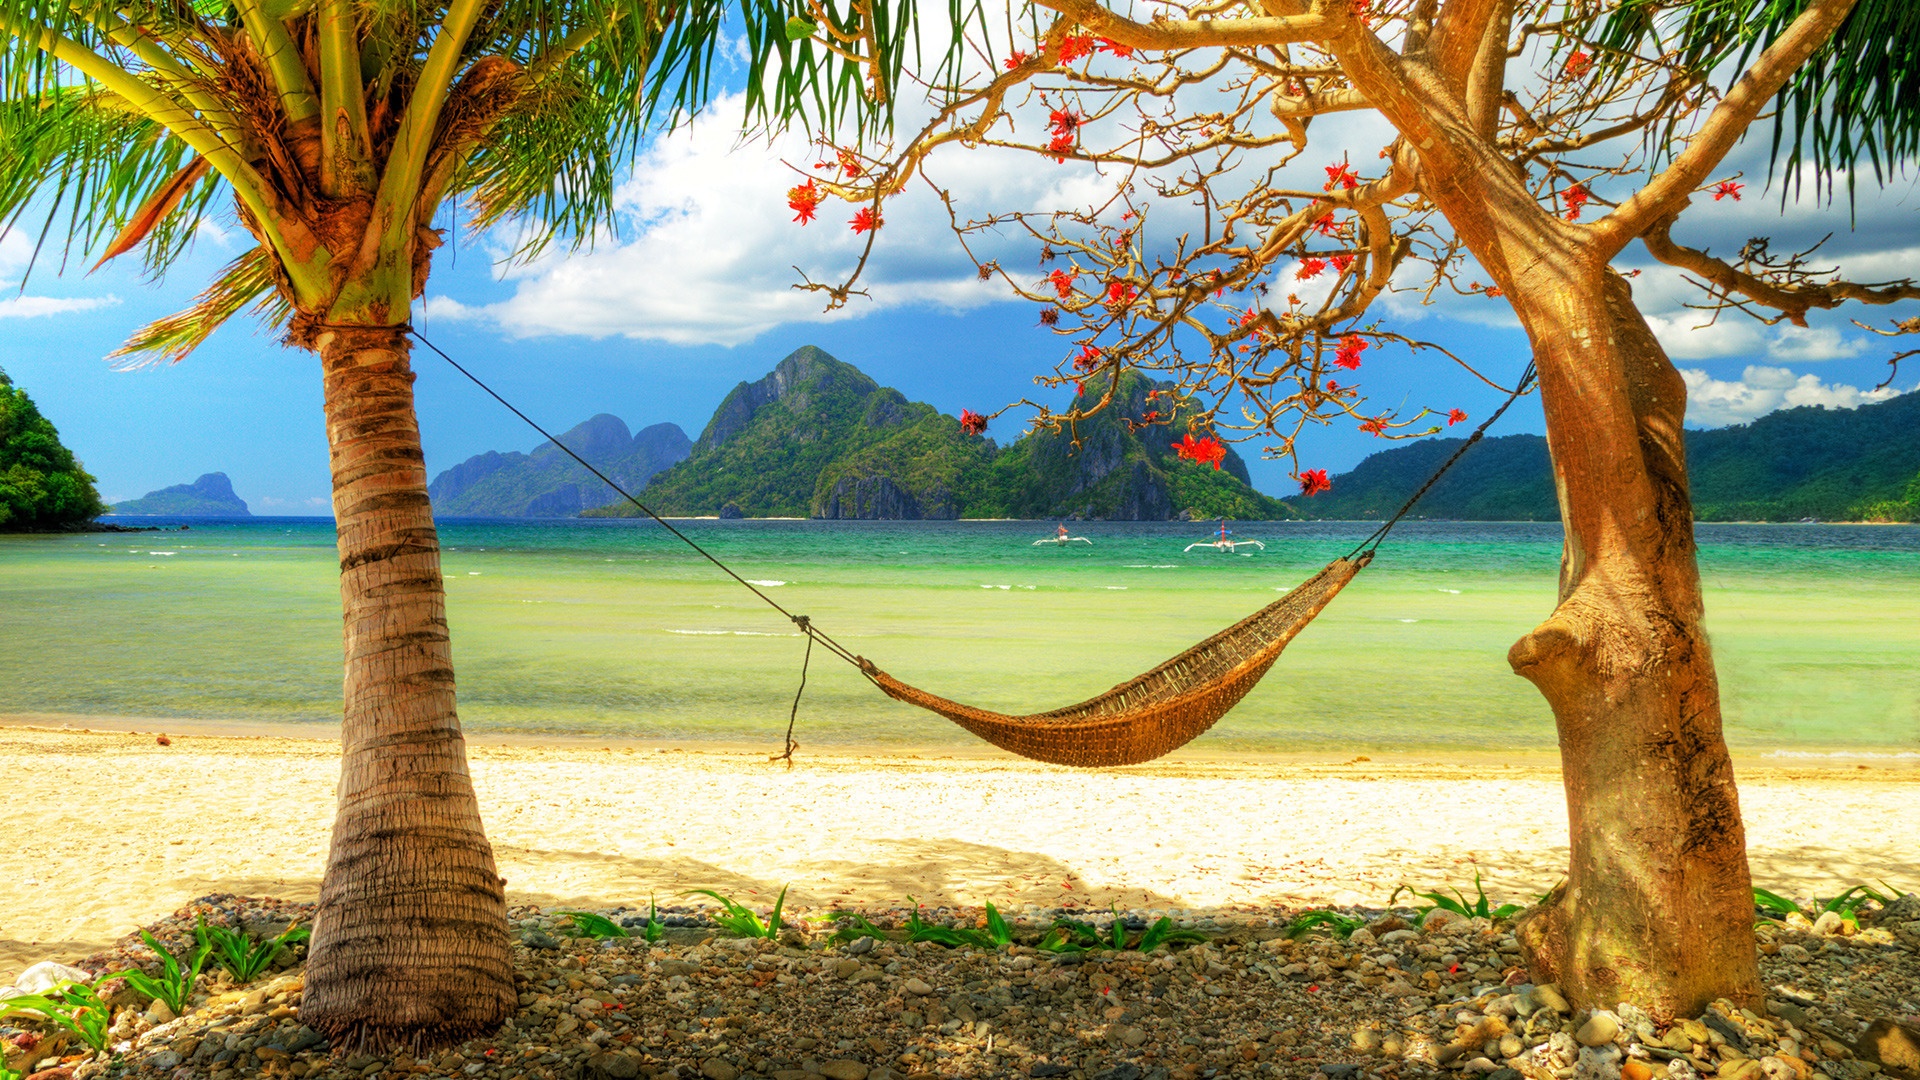 Holiday Rest in a Hammock # 1920x1080. All For Desktop